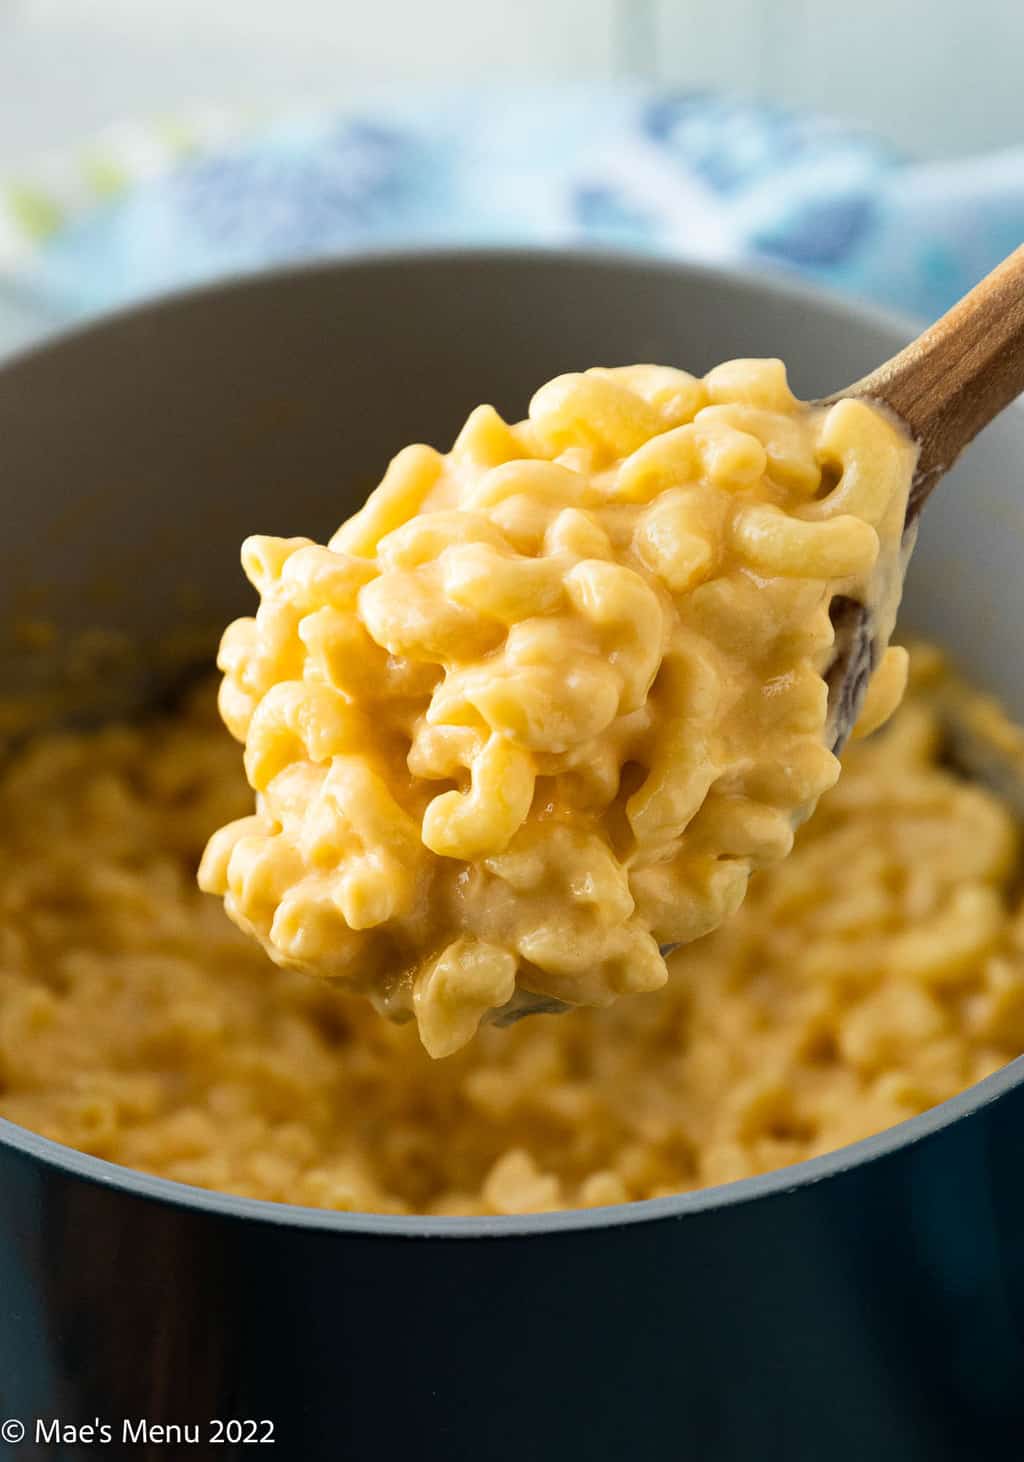 An up-close shot of a wooden spoonful of Greek yogurt Mac and cheese in front of the pan of mac and cheese.